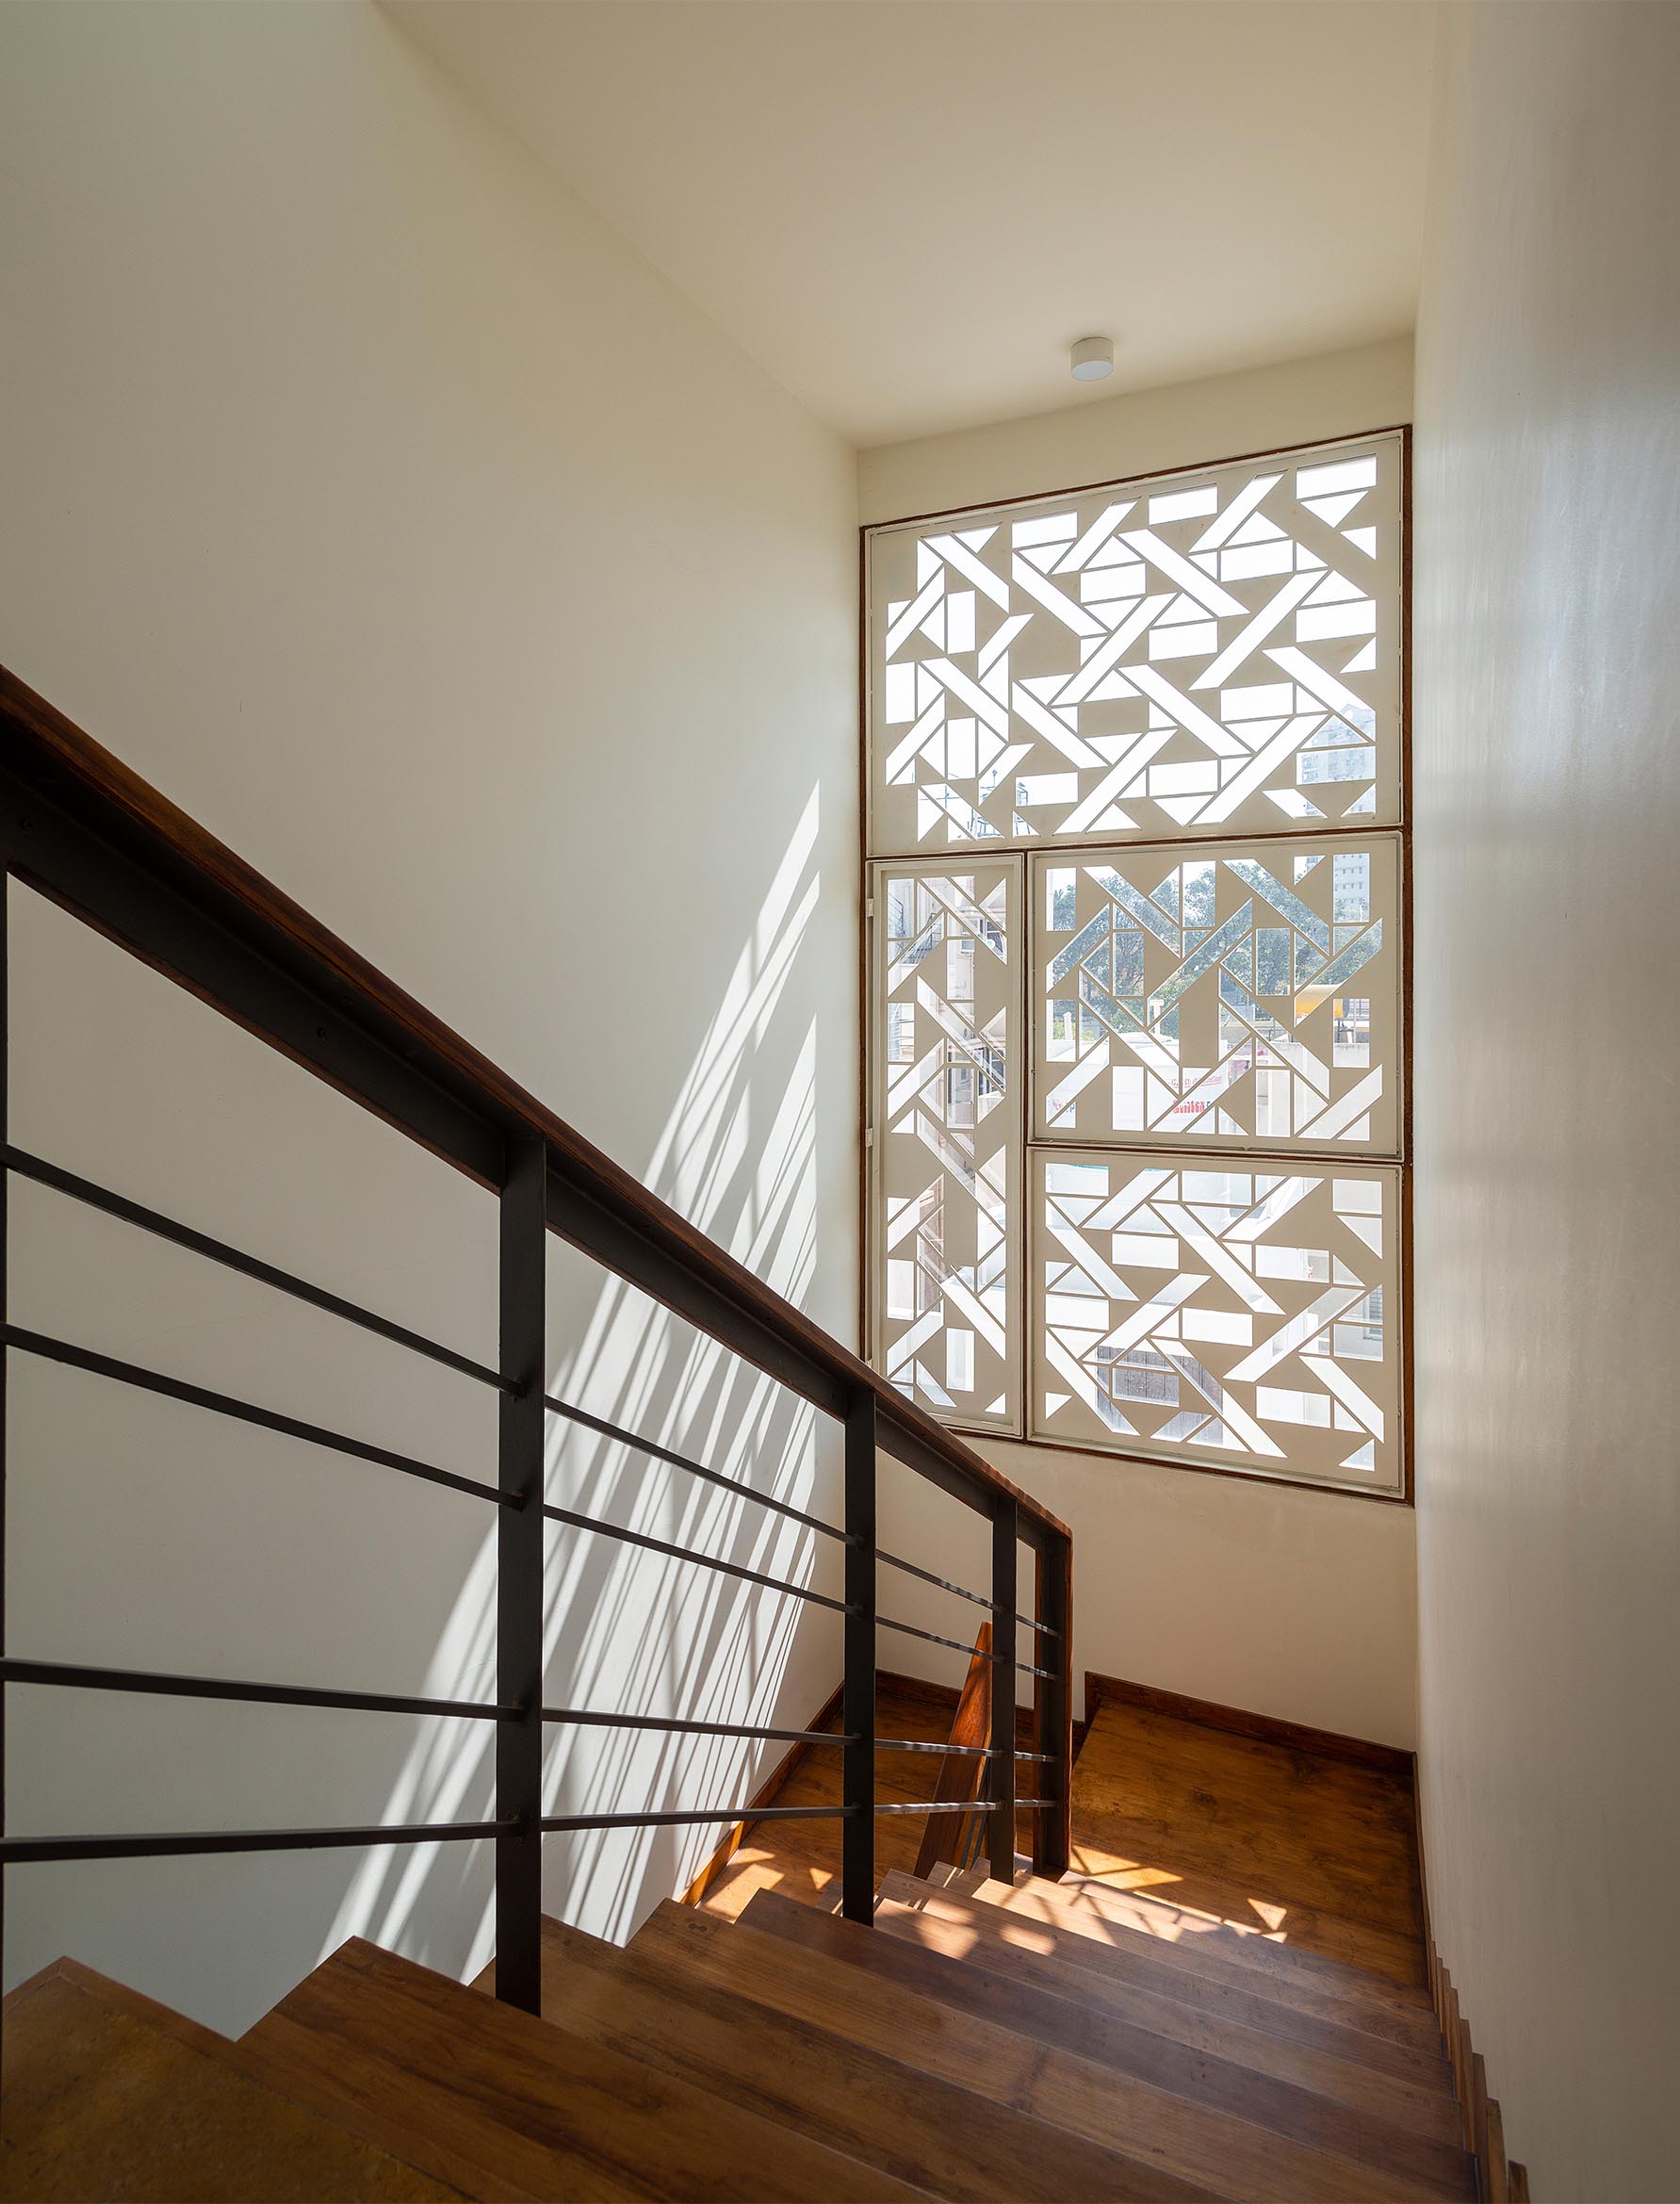 A white window screen with a geometric design casts interesting shadows on the walls and floor.